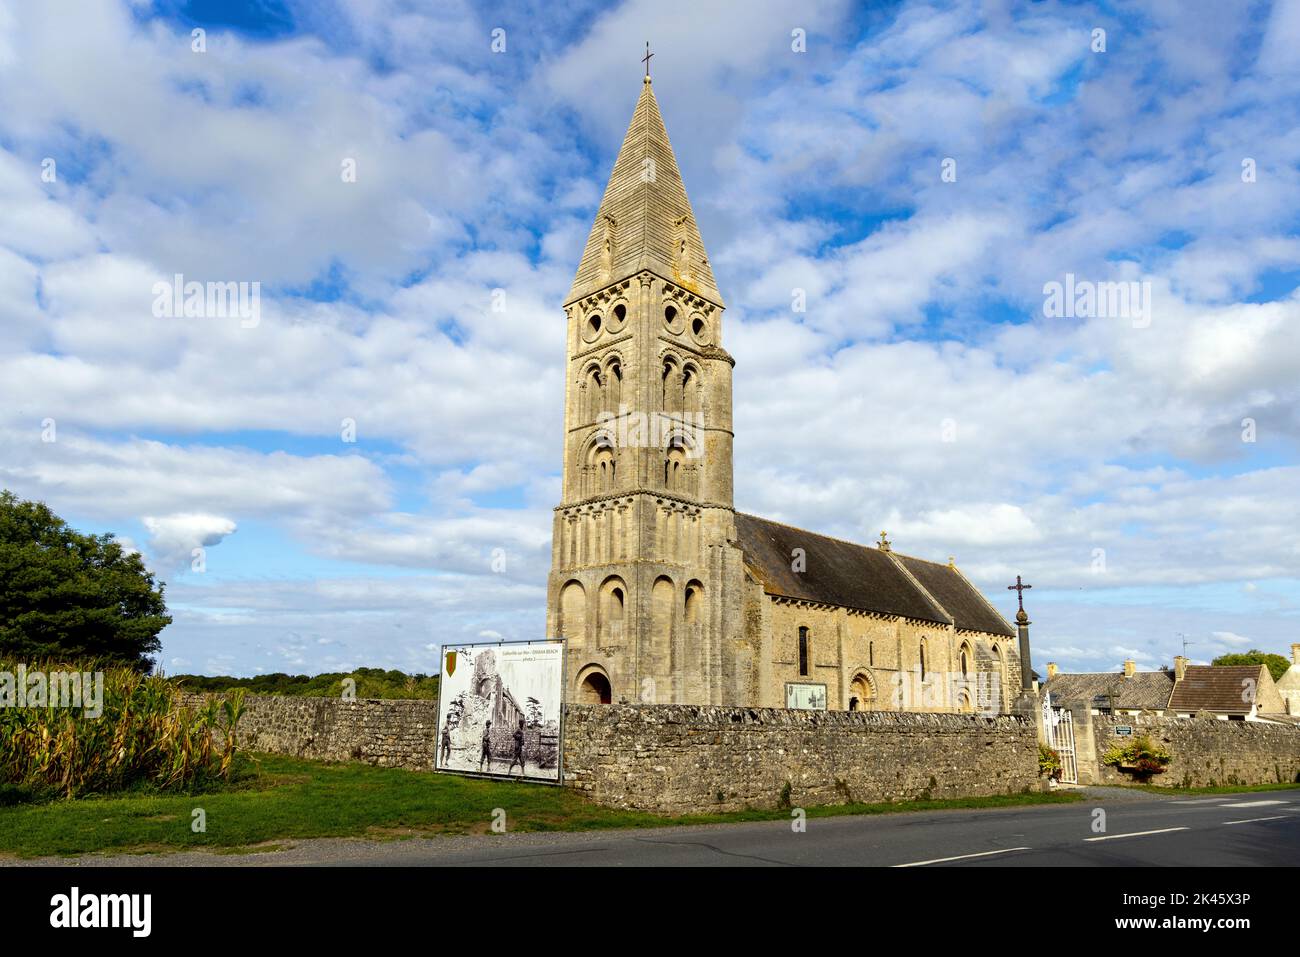 Church of Notre-Dame de l'Assomption de Colleville, with poster-sized photo of Allied advance during WW II, Colleville-sur-Mer, Normandy, France Stock Photo